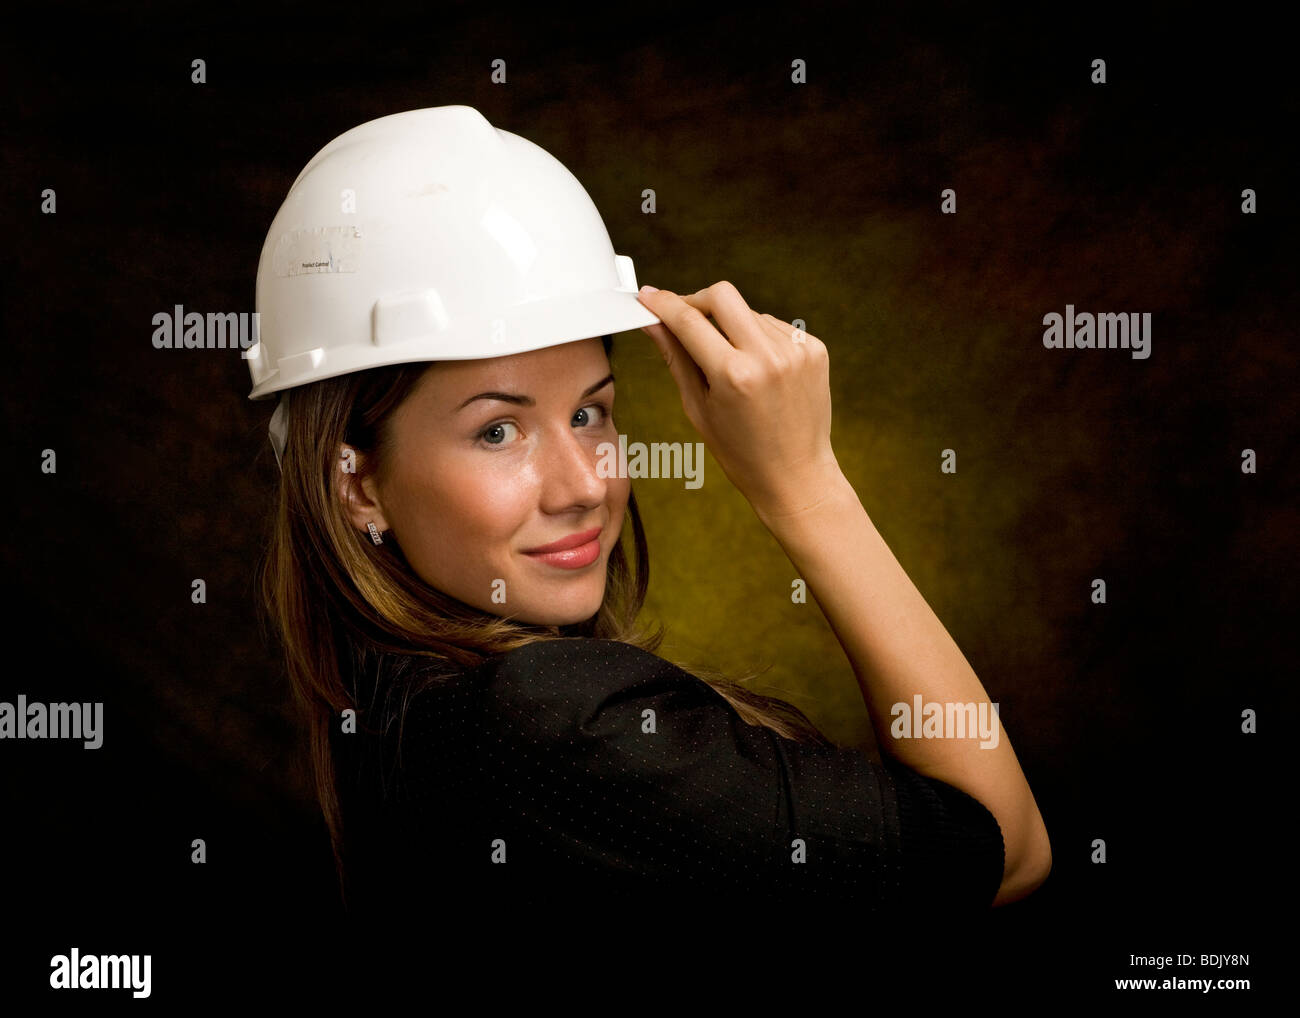 Young Caucasian female wearing a hardhat in studio Stock Photo